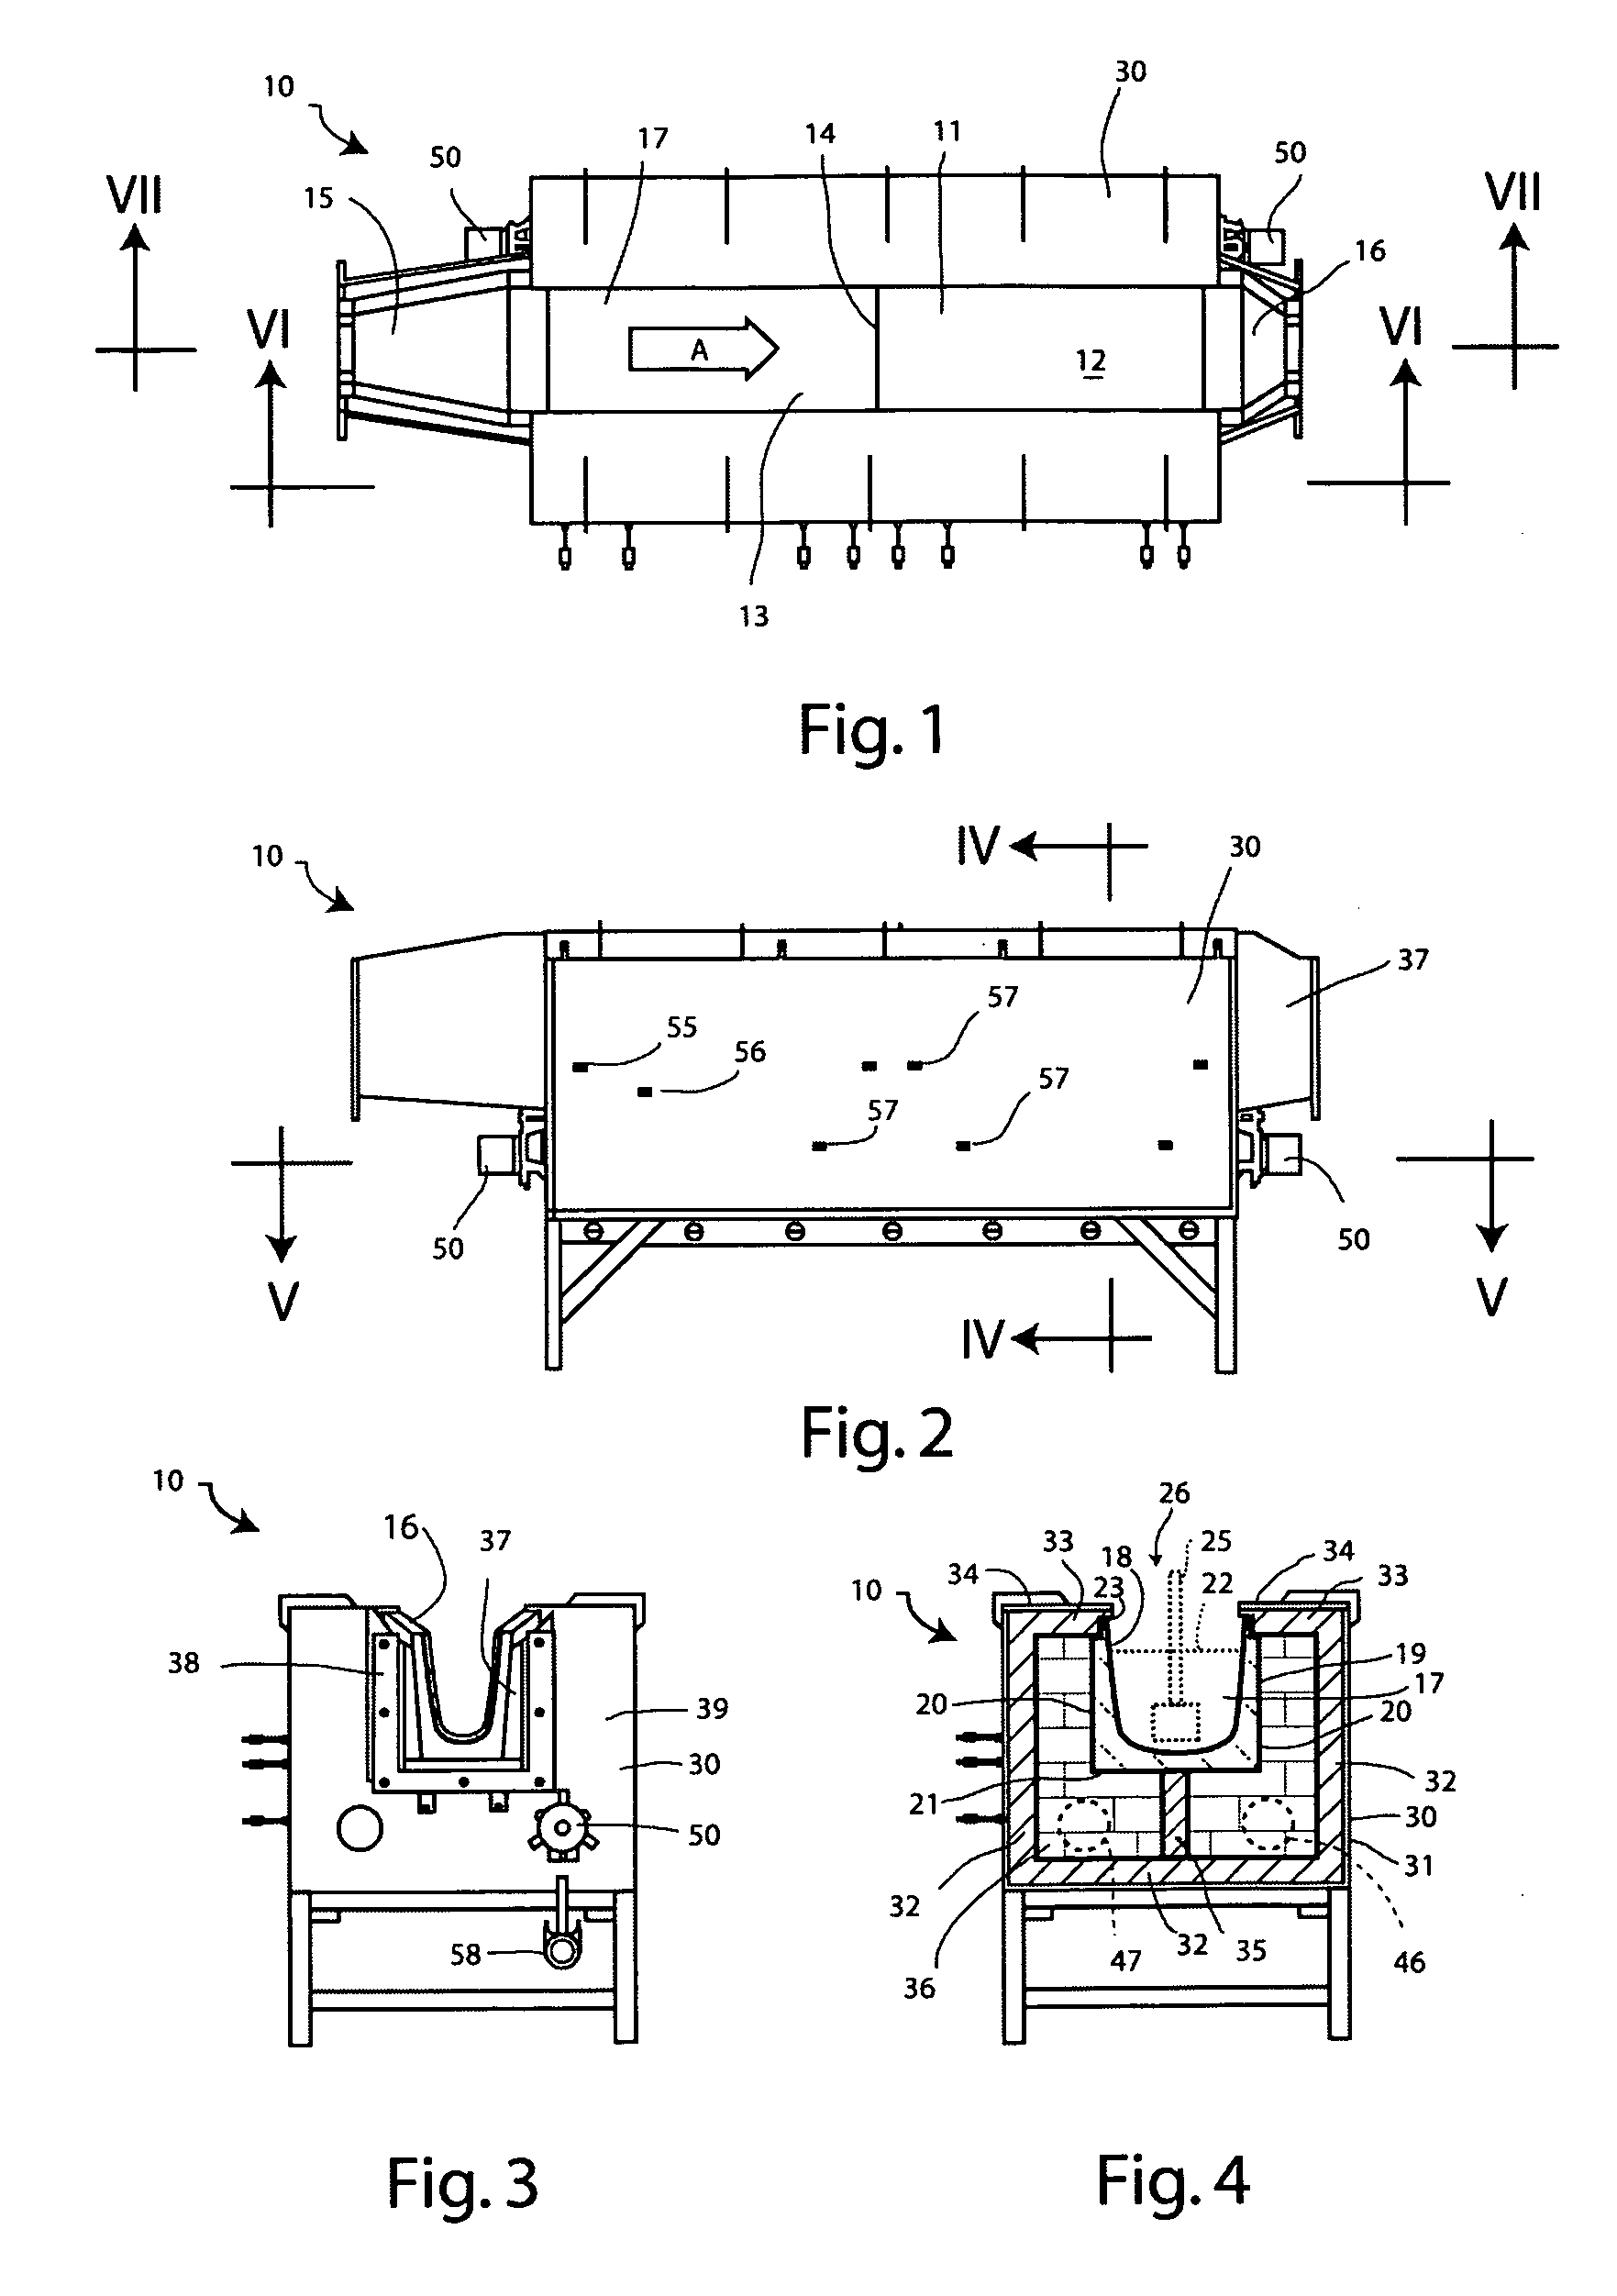 Method of and apparatus for conveying molten metals while providing heat thereto